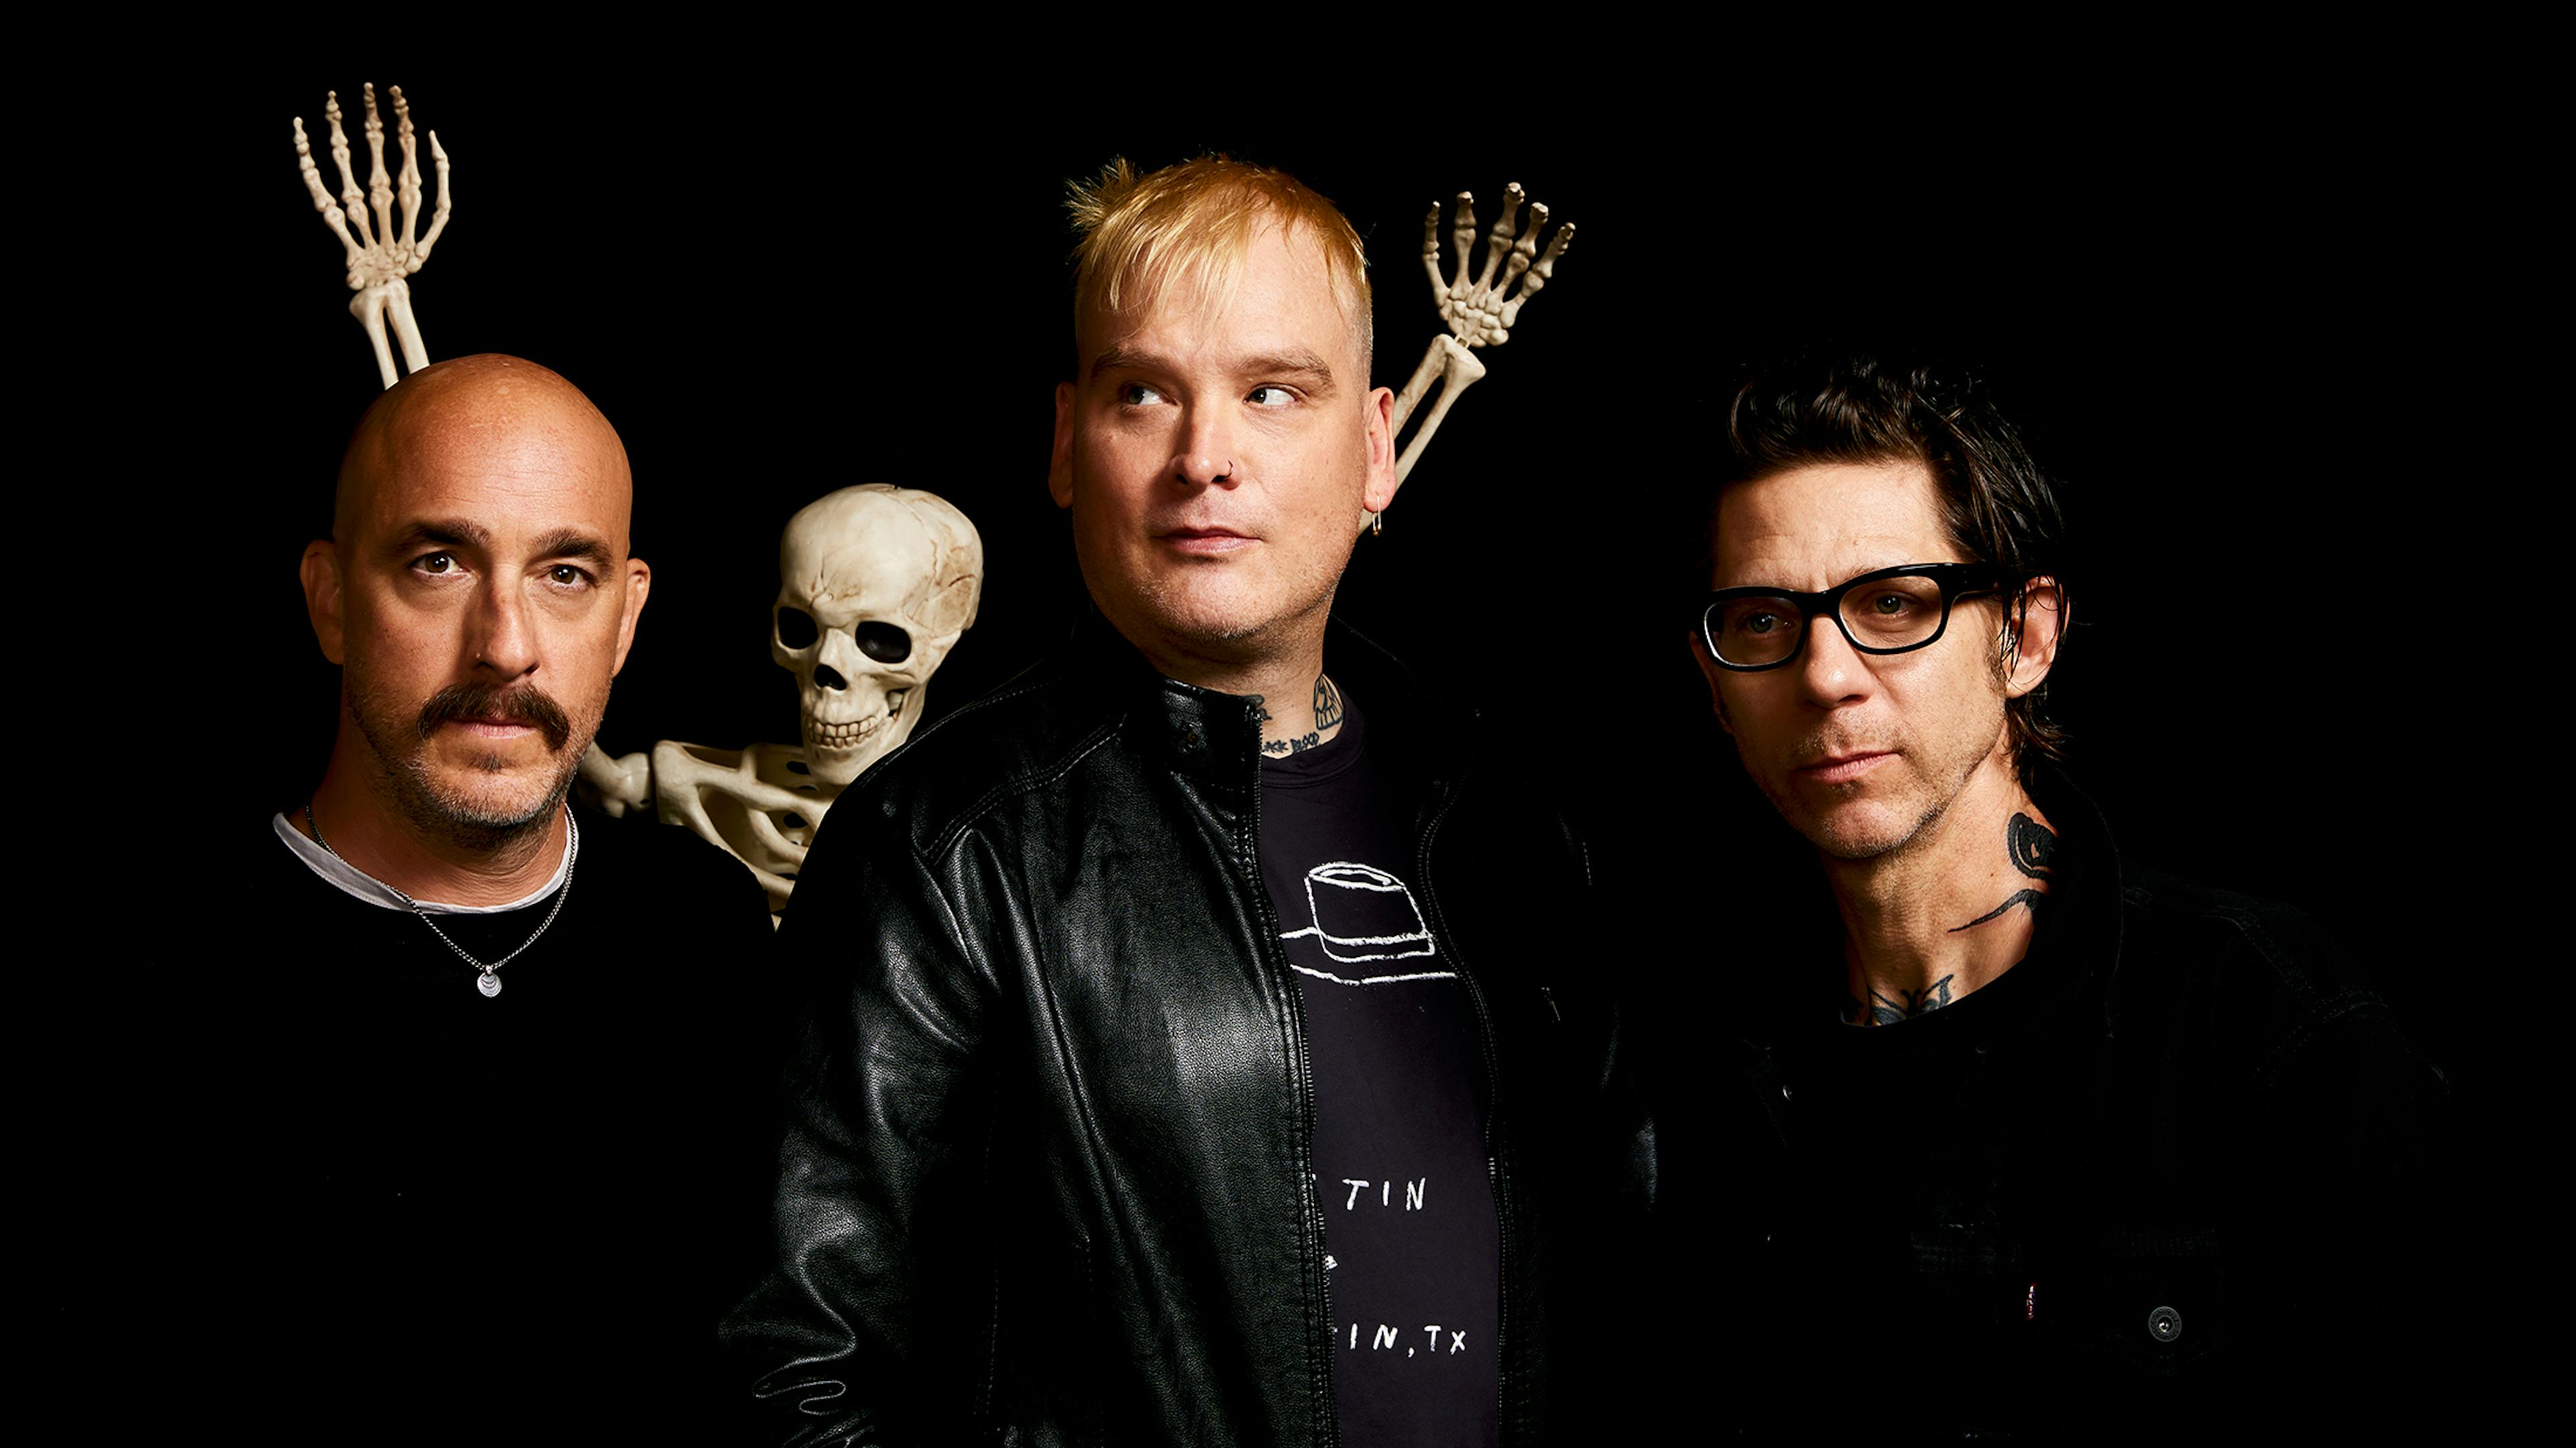 Alkaline Trio: “It’s like we’re living in the apocalypse… it’s end-of-days stuff out there”